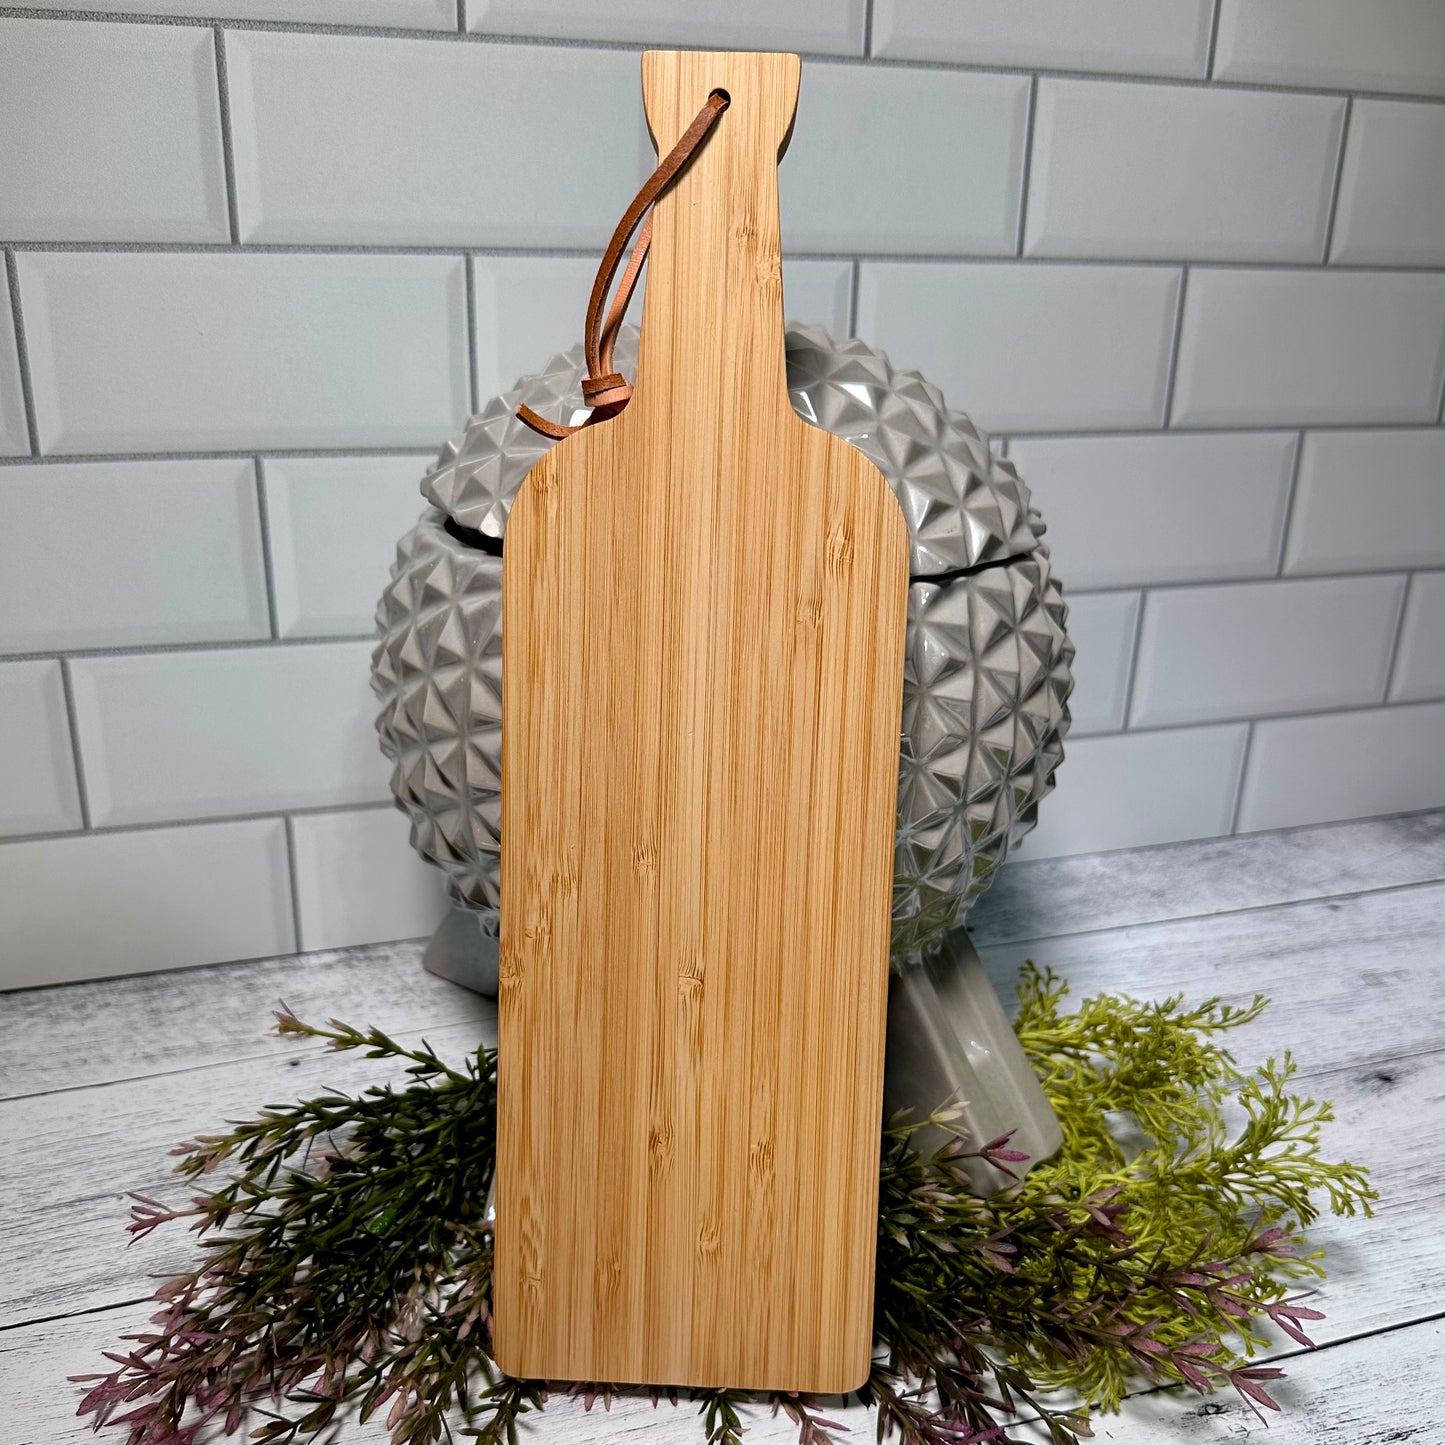 Anyone Can Cook Wooden Bread / Charcuterie Cutting Board with Handle